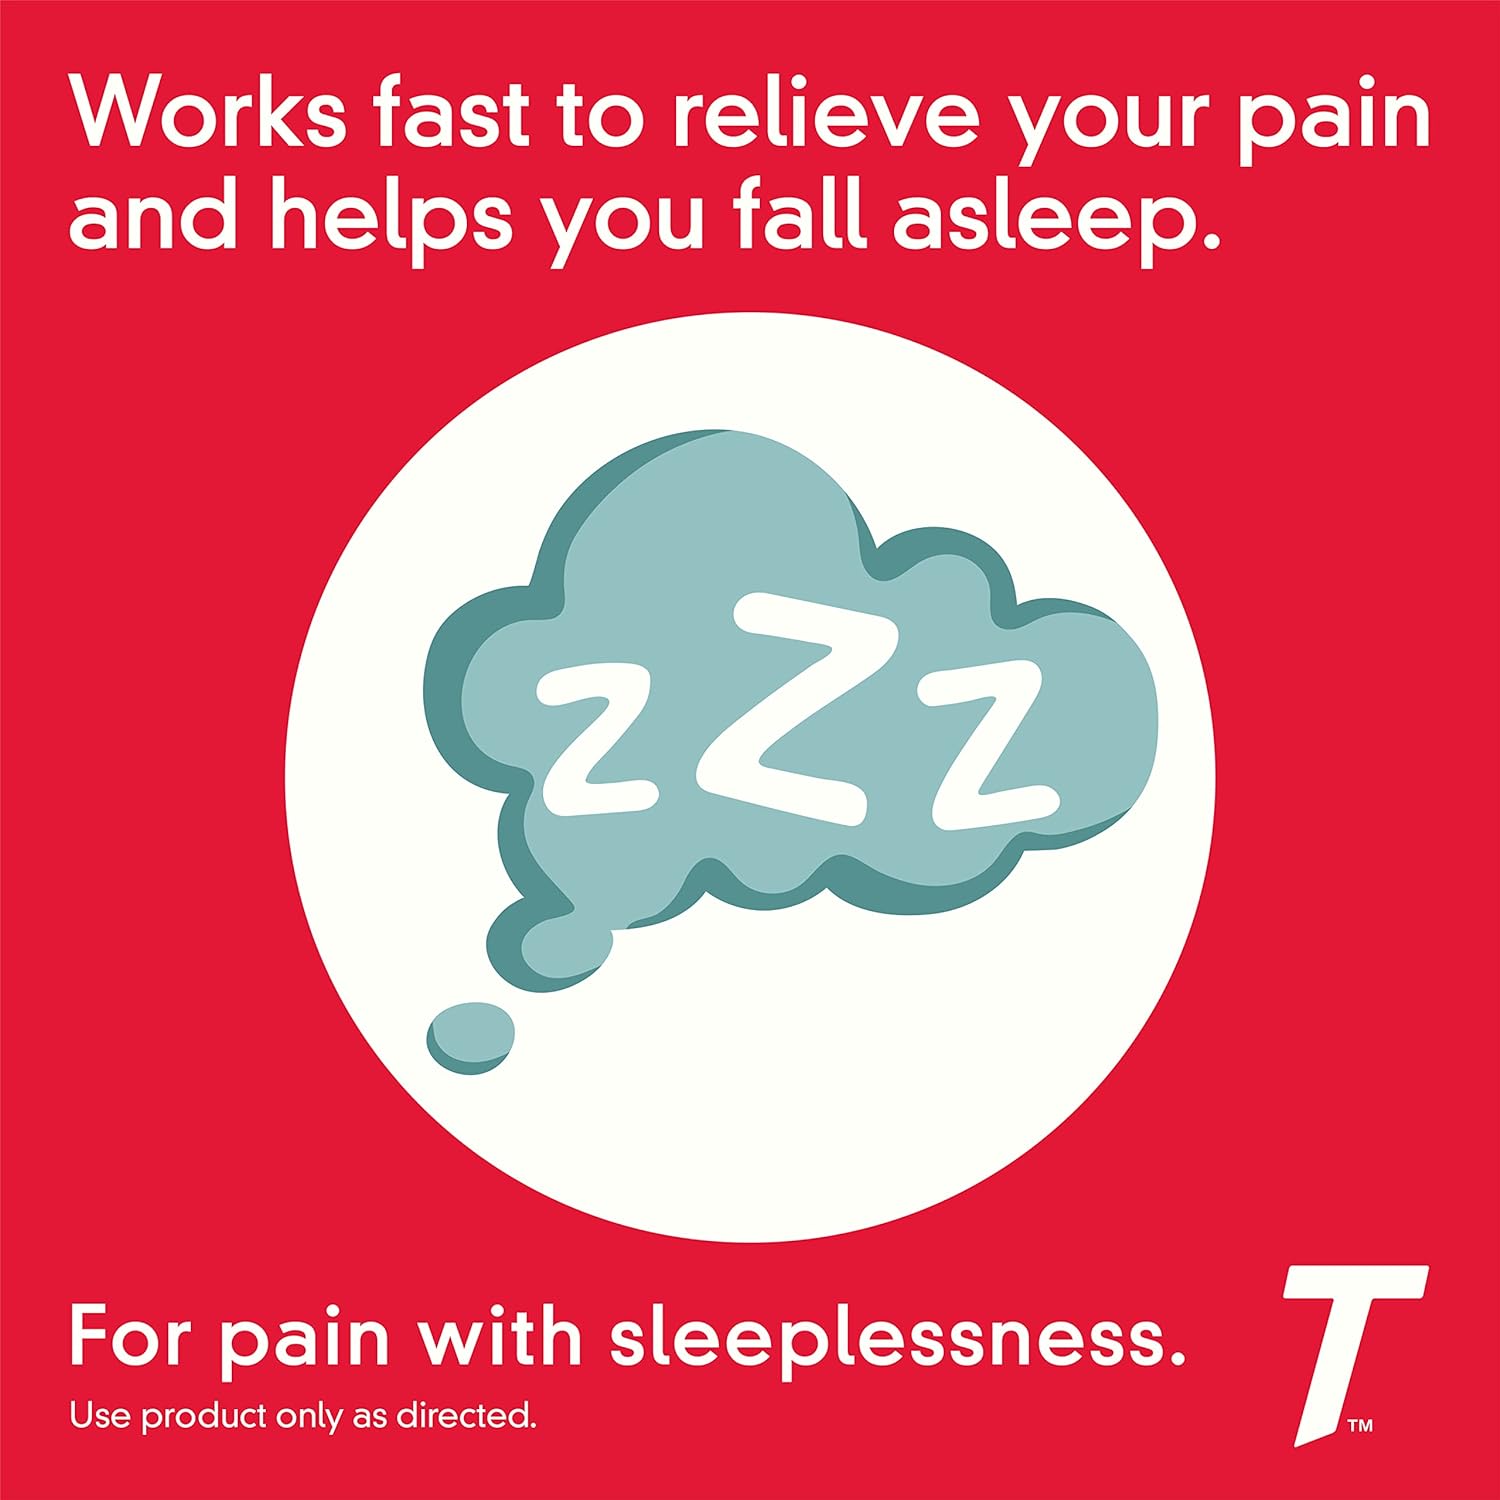 Tylenol PM Extra Strength Nighttime Pain Reliever & Sleep Aid Caplets, 500 mg Acetaminophen & 25 mg Diphenhydramine HCl, Relief for Nighttime Aches & Pains, Non-Habit Forming, 150 ct : Health & Household